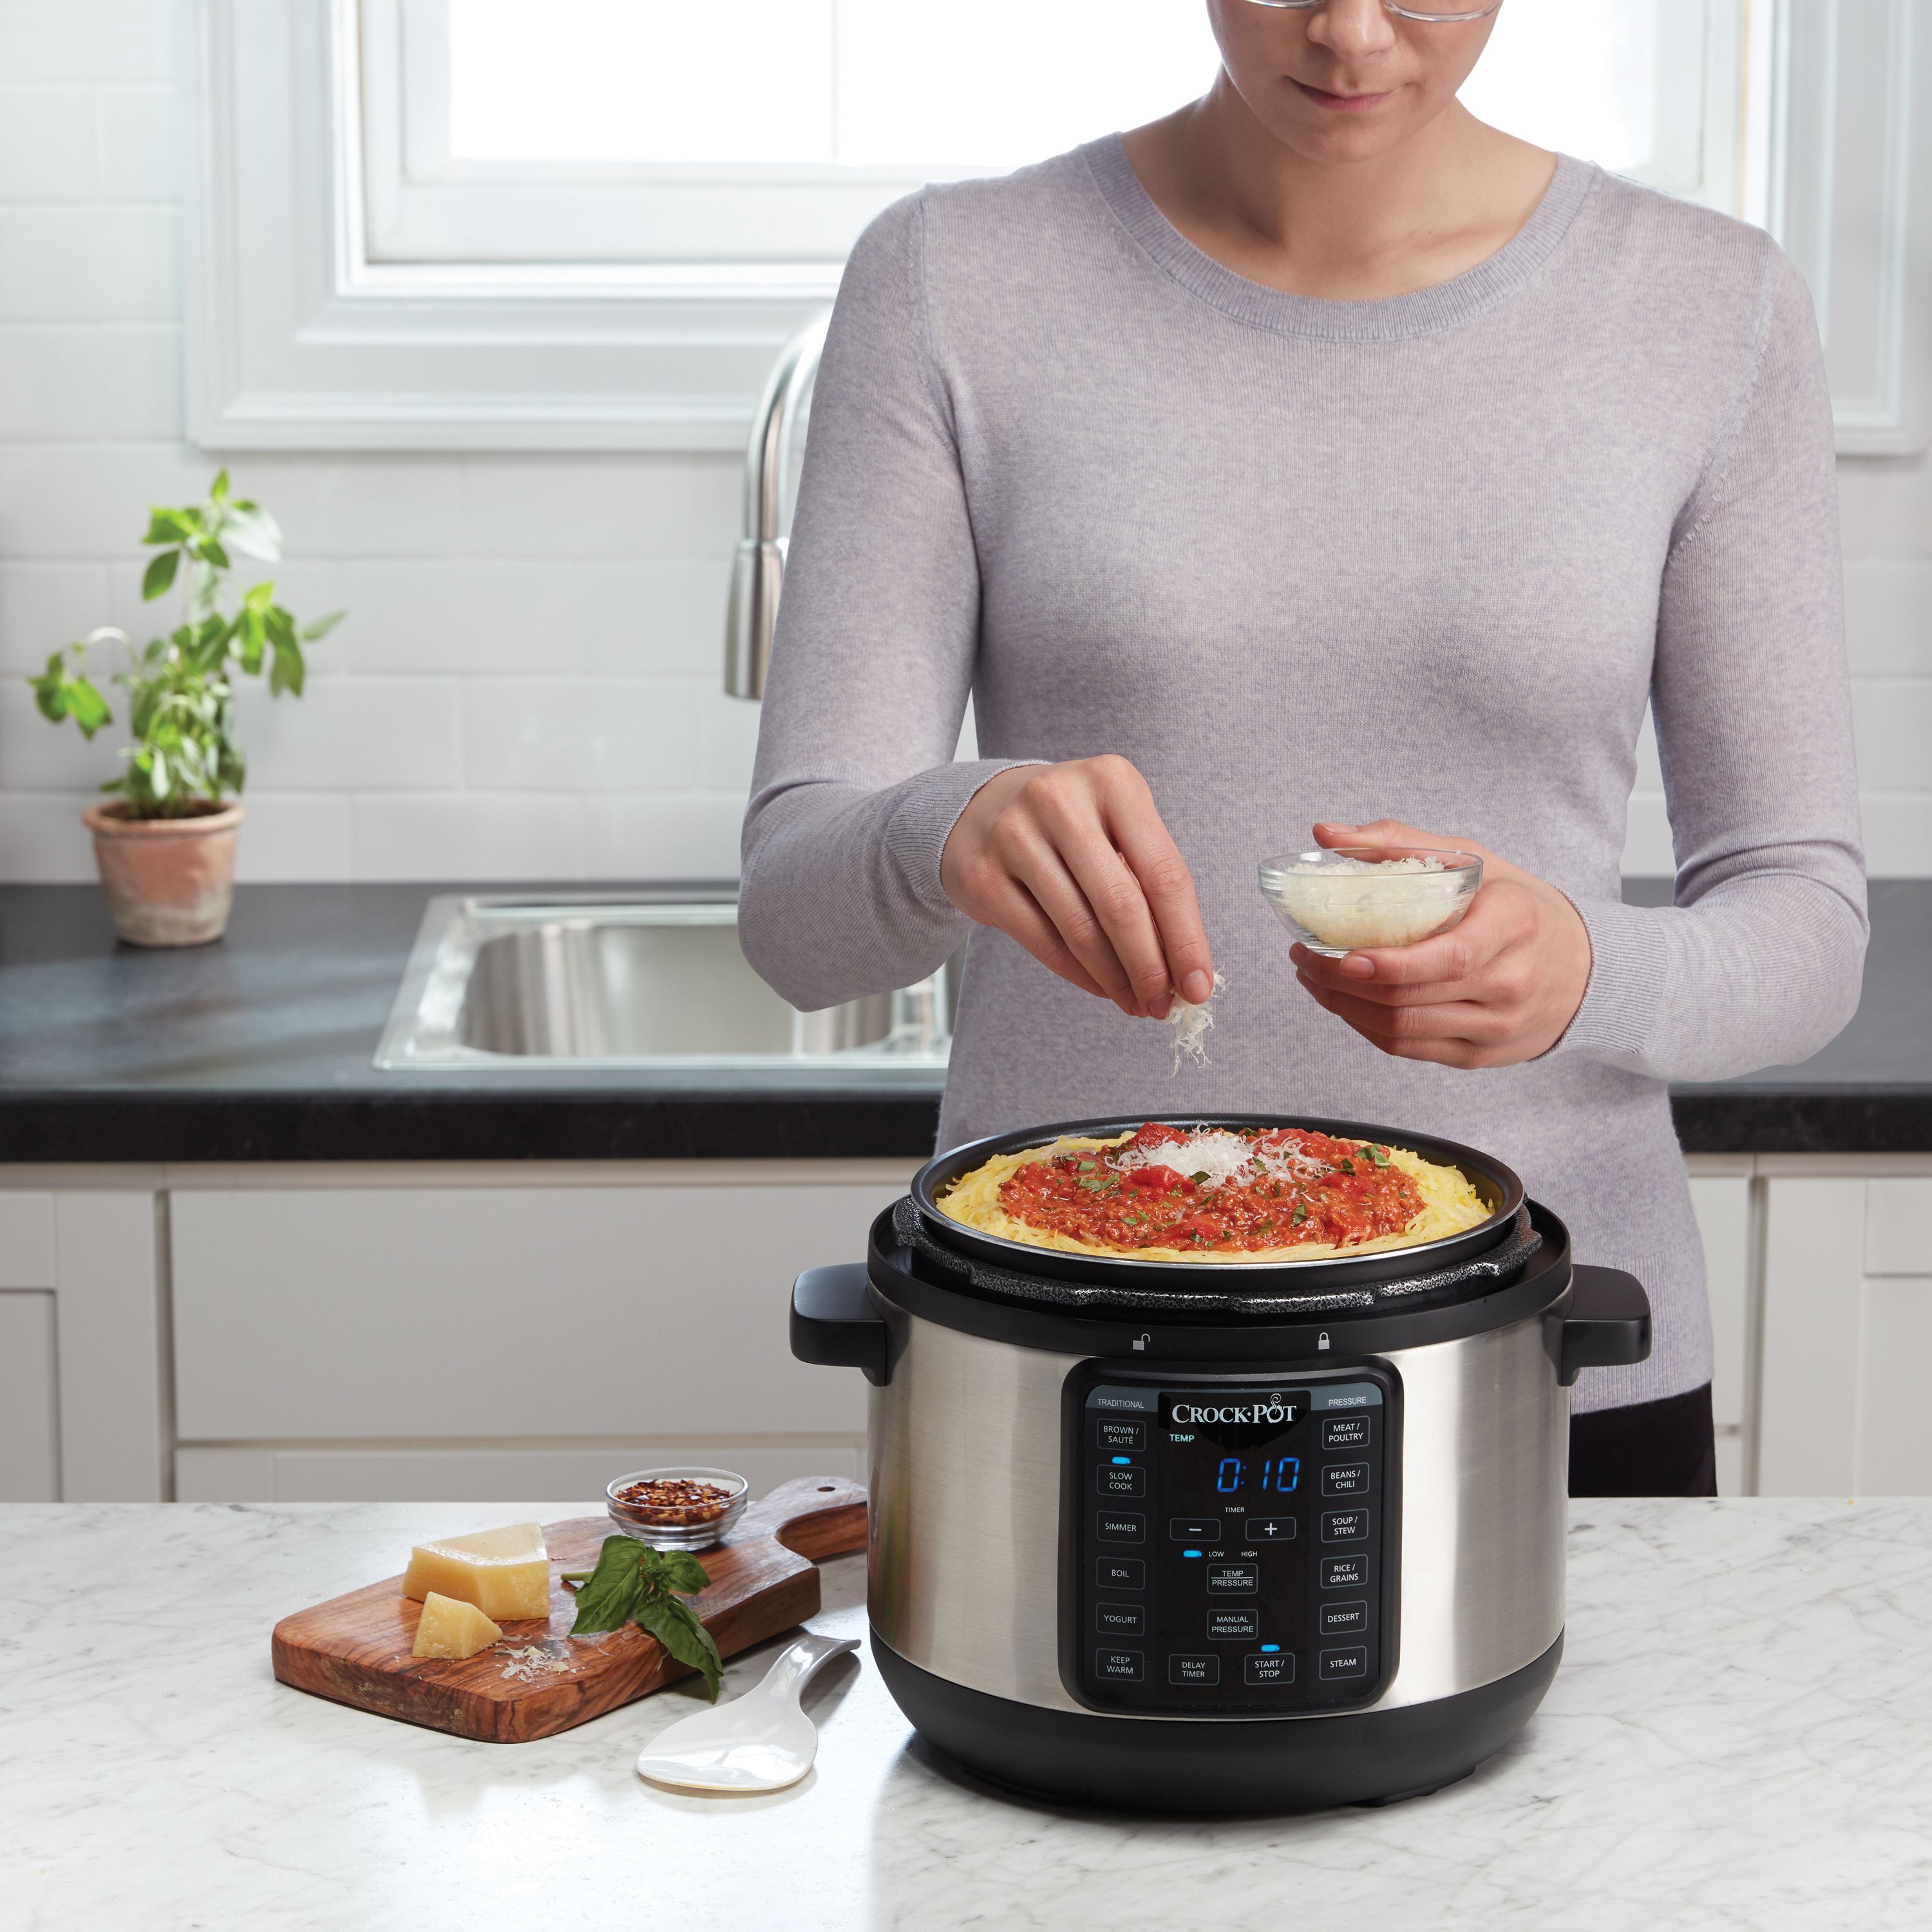 Crock-Pot 4 Quart 8-in-1 Multi-Use Express Crock Programmable Slow Cooker, Pressure Cooker, Sauté, and Steamer in Silver - image 3 of 9